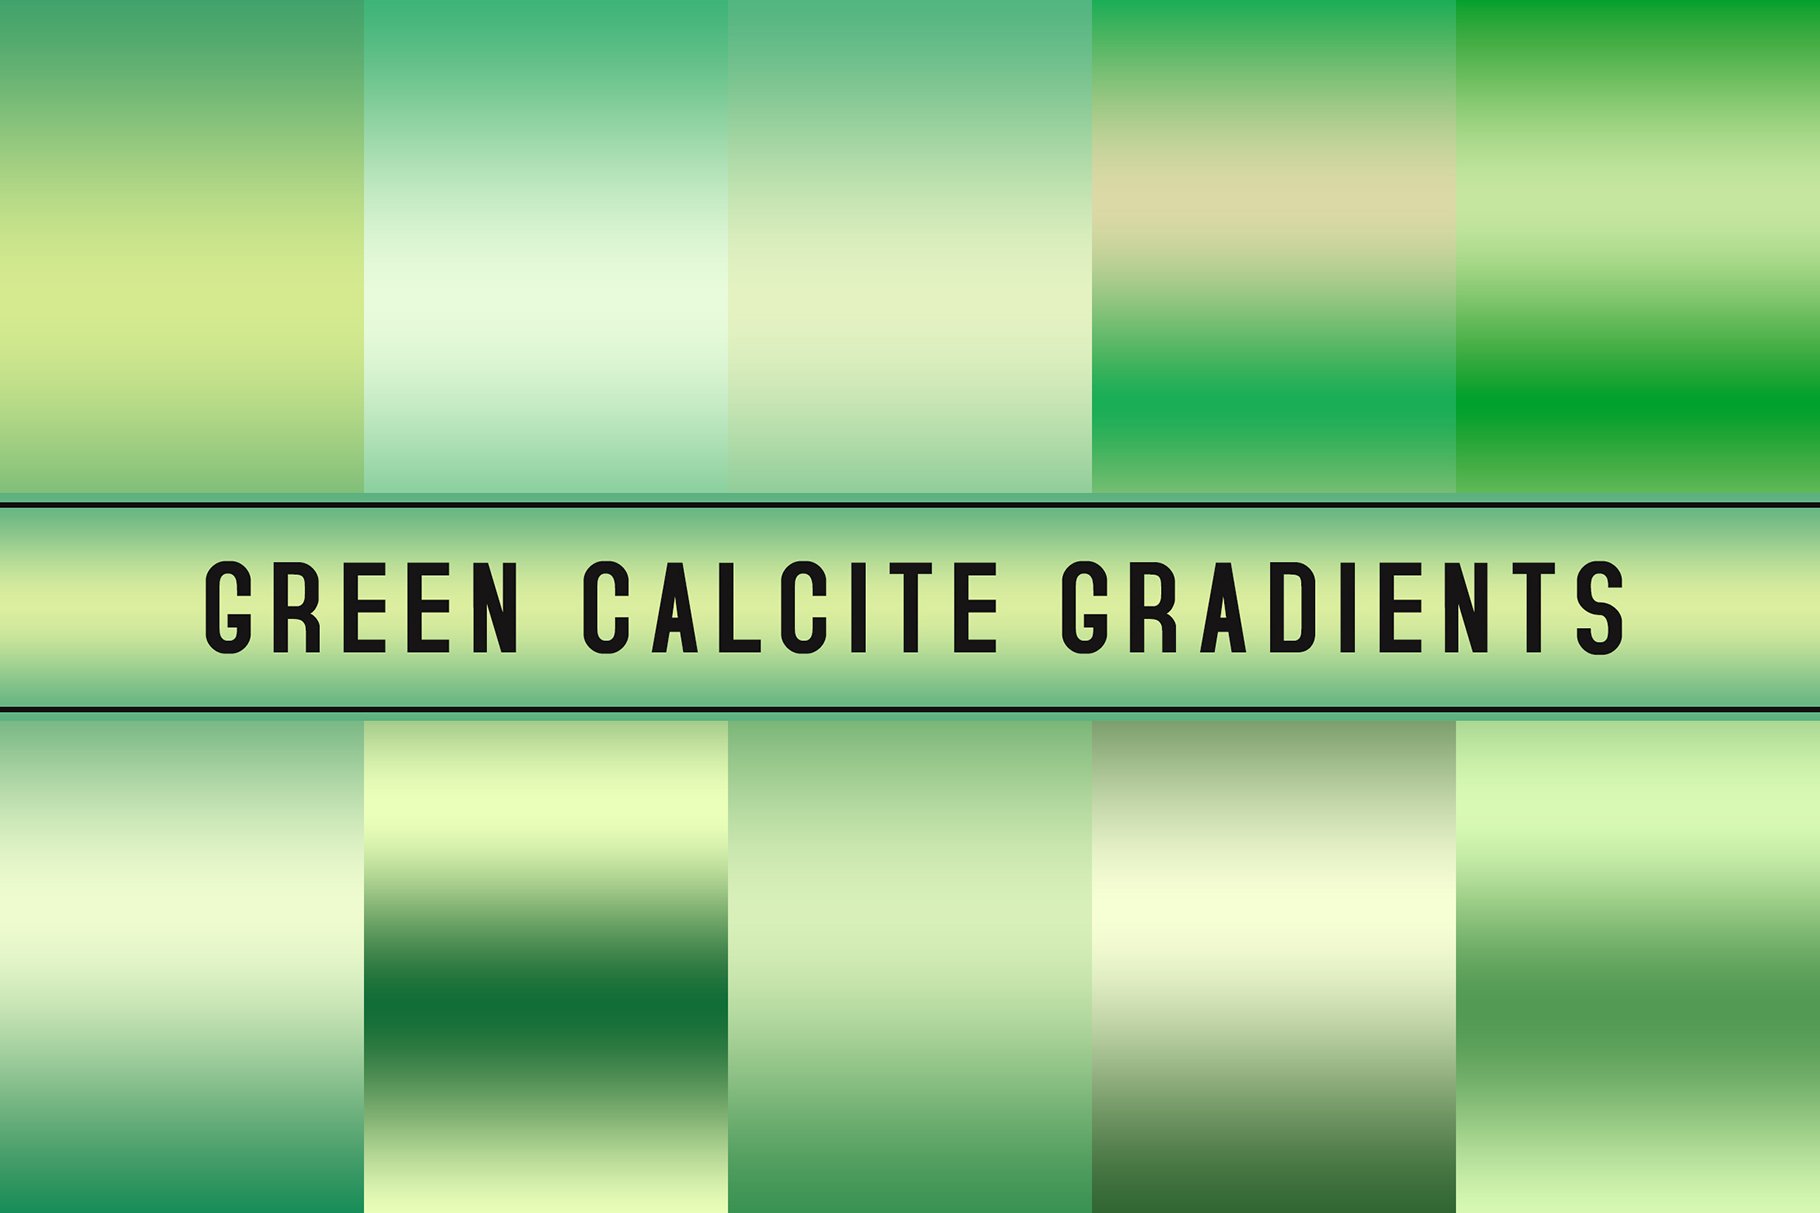 Green Calcite Gradientscover image.